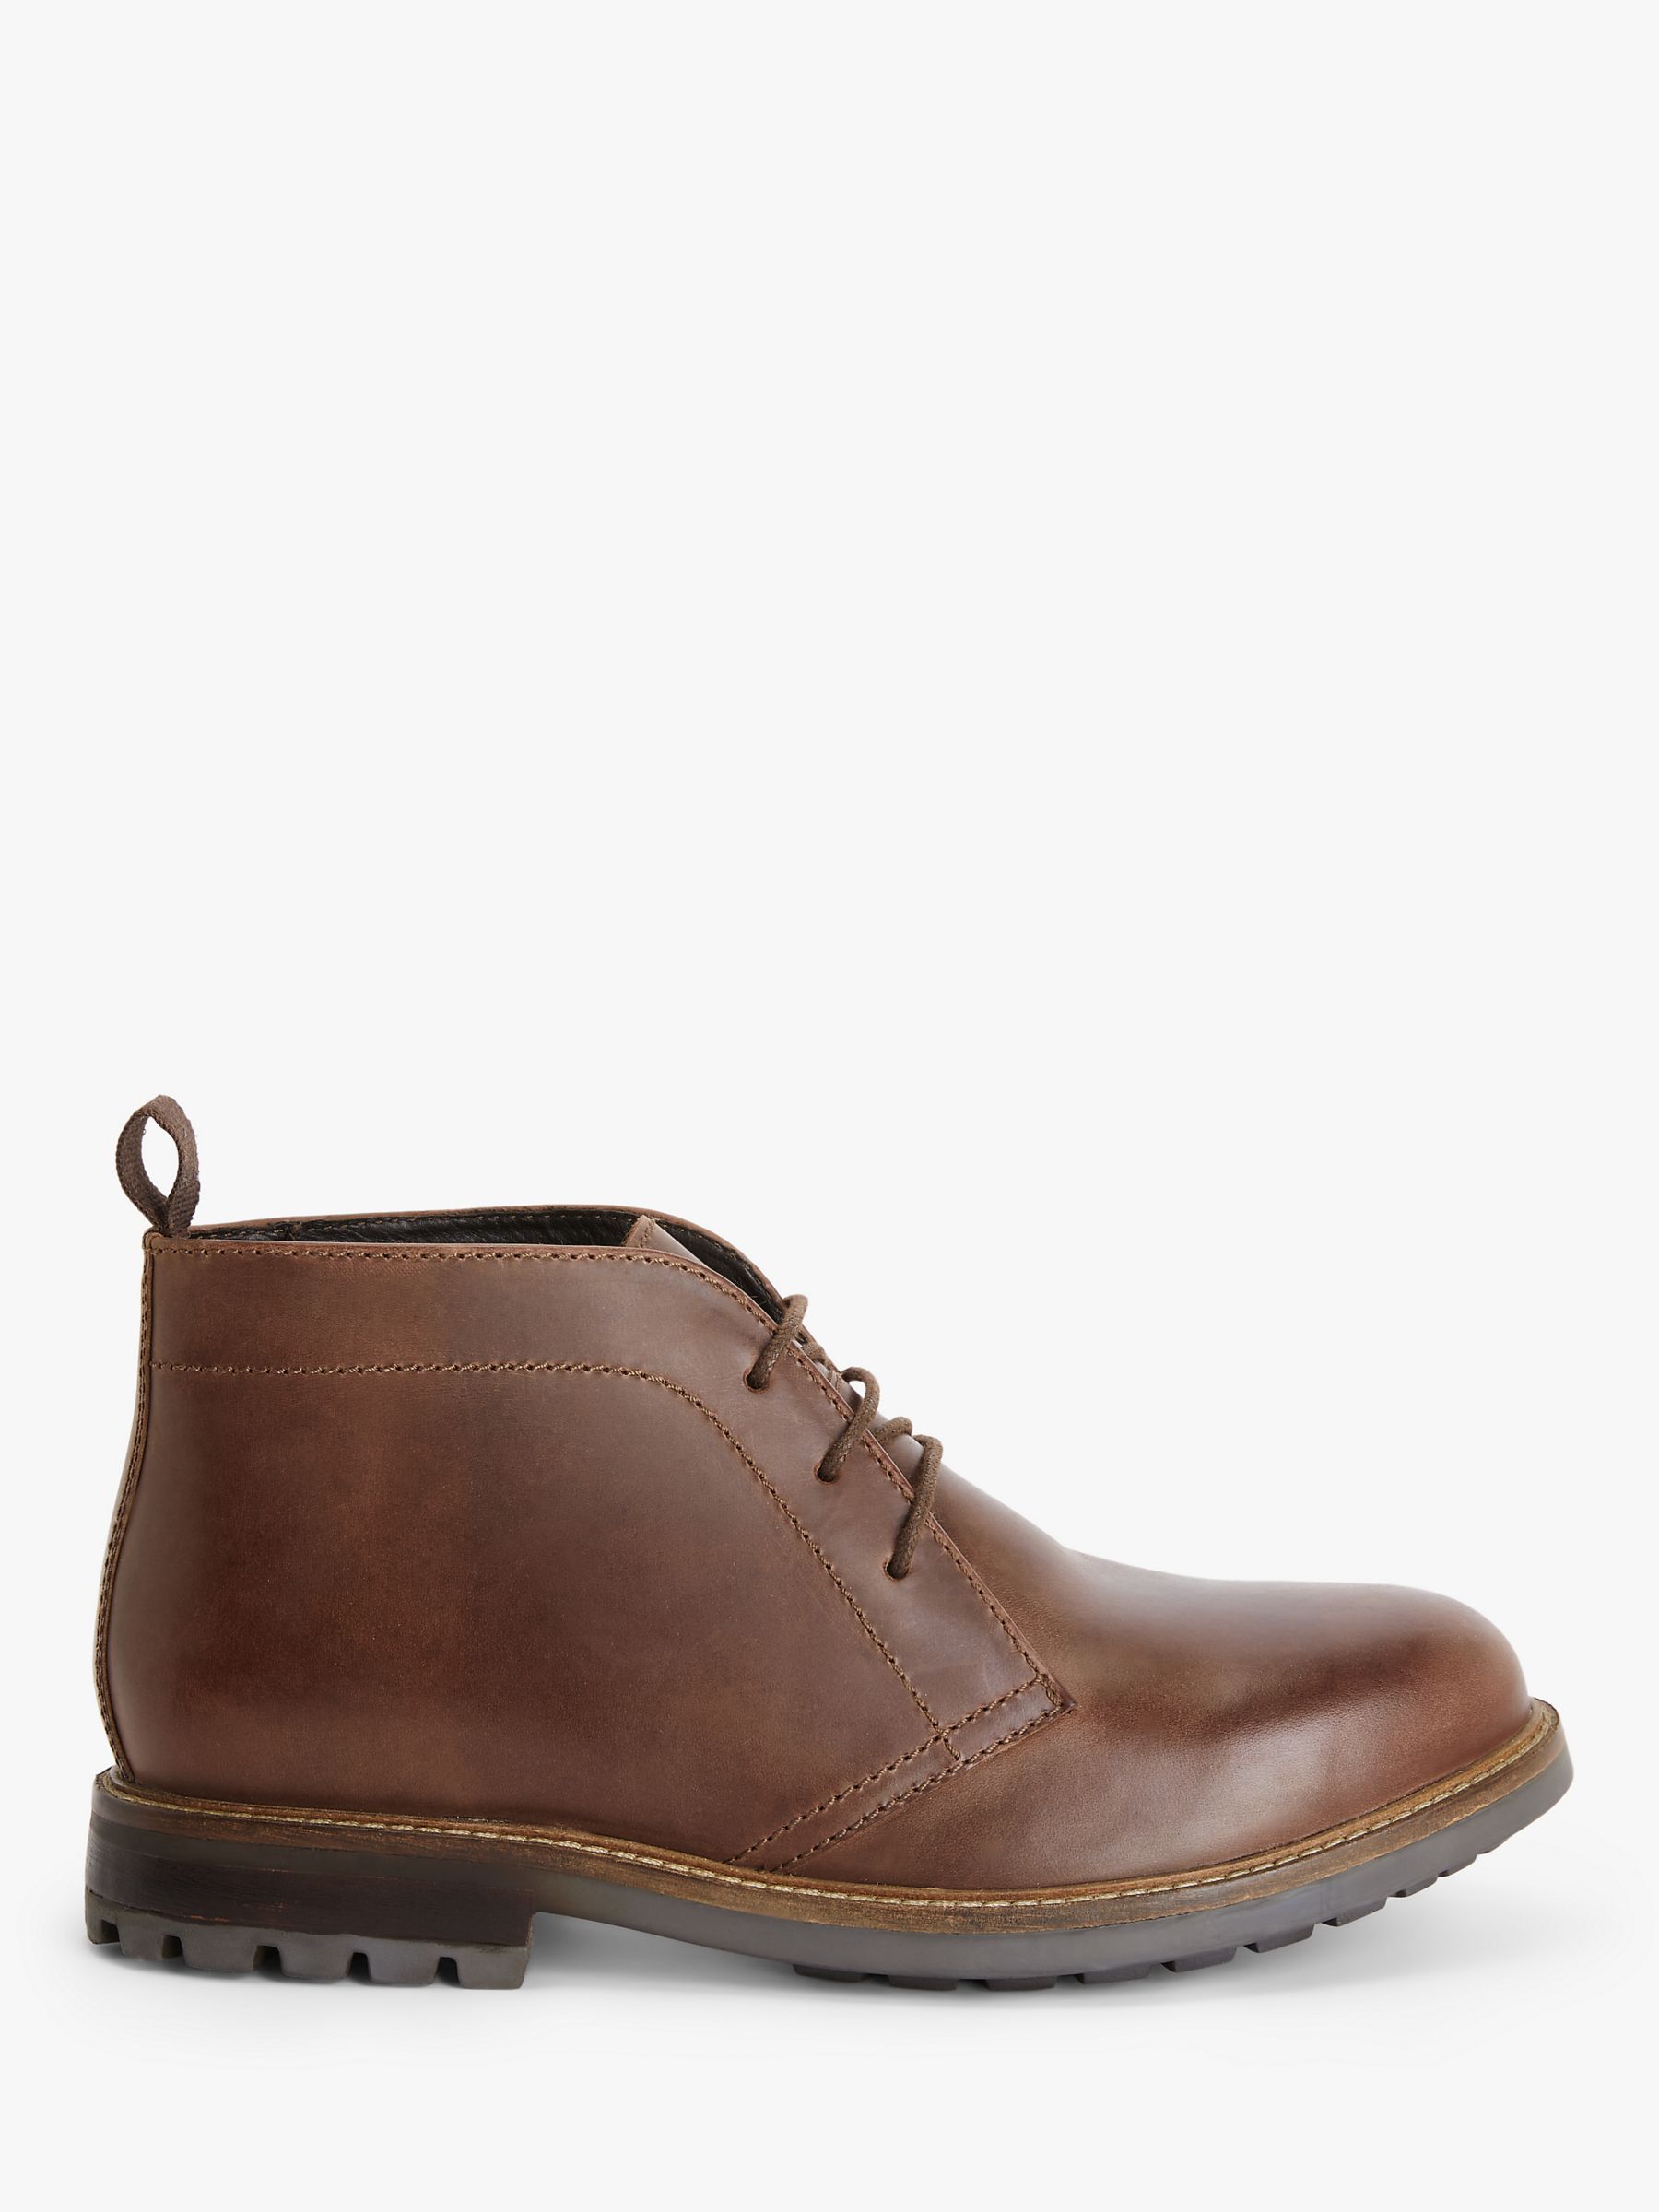 John Lewis Cleated Chukka Boots, Brown